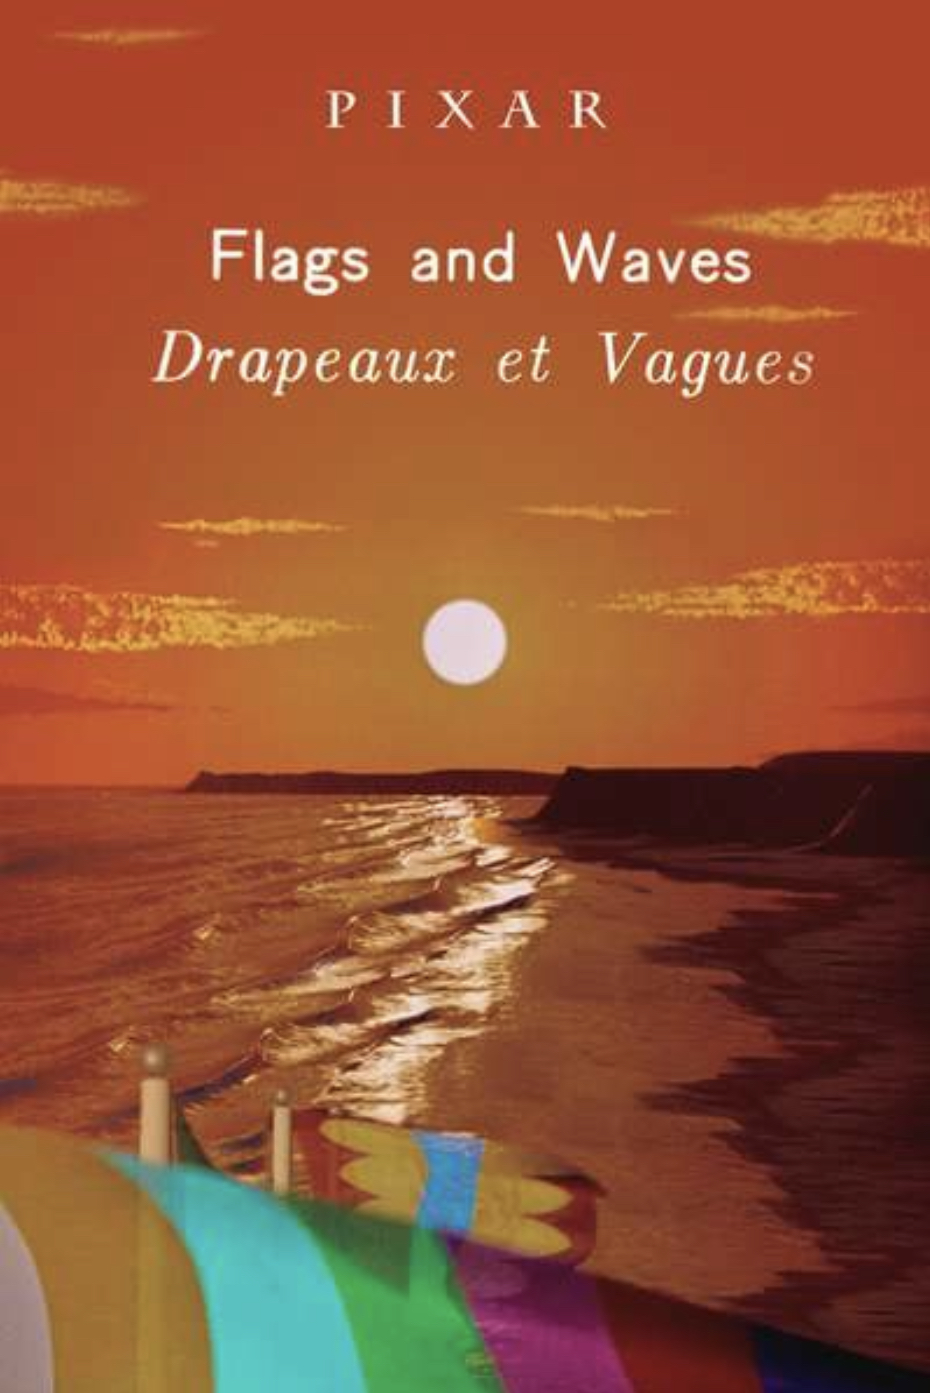 Flags and Waves (1986) Screenshot 1 